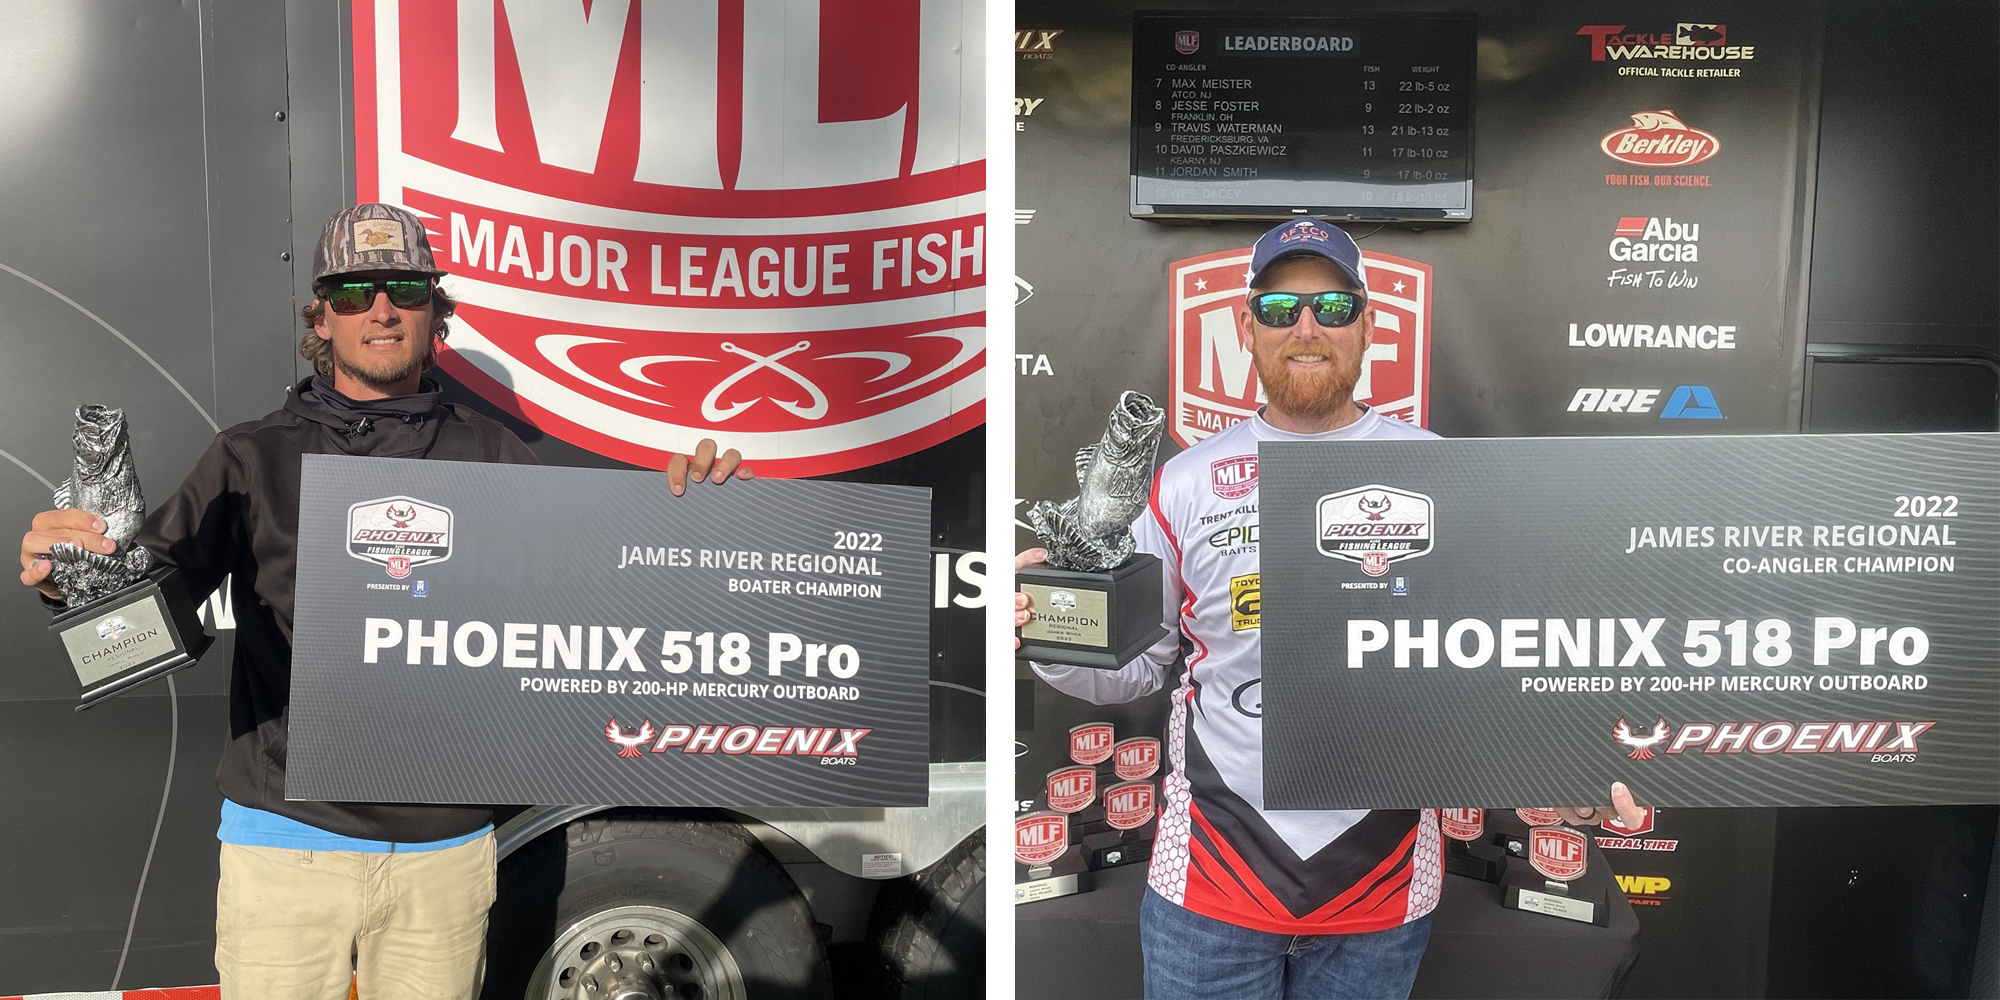 Chester's Casey earns victory at Phoenix Bass Fishing League